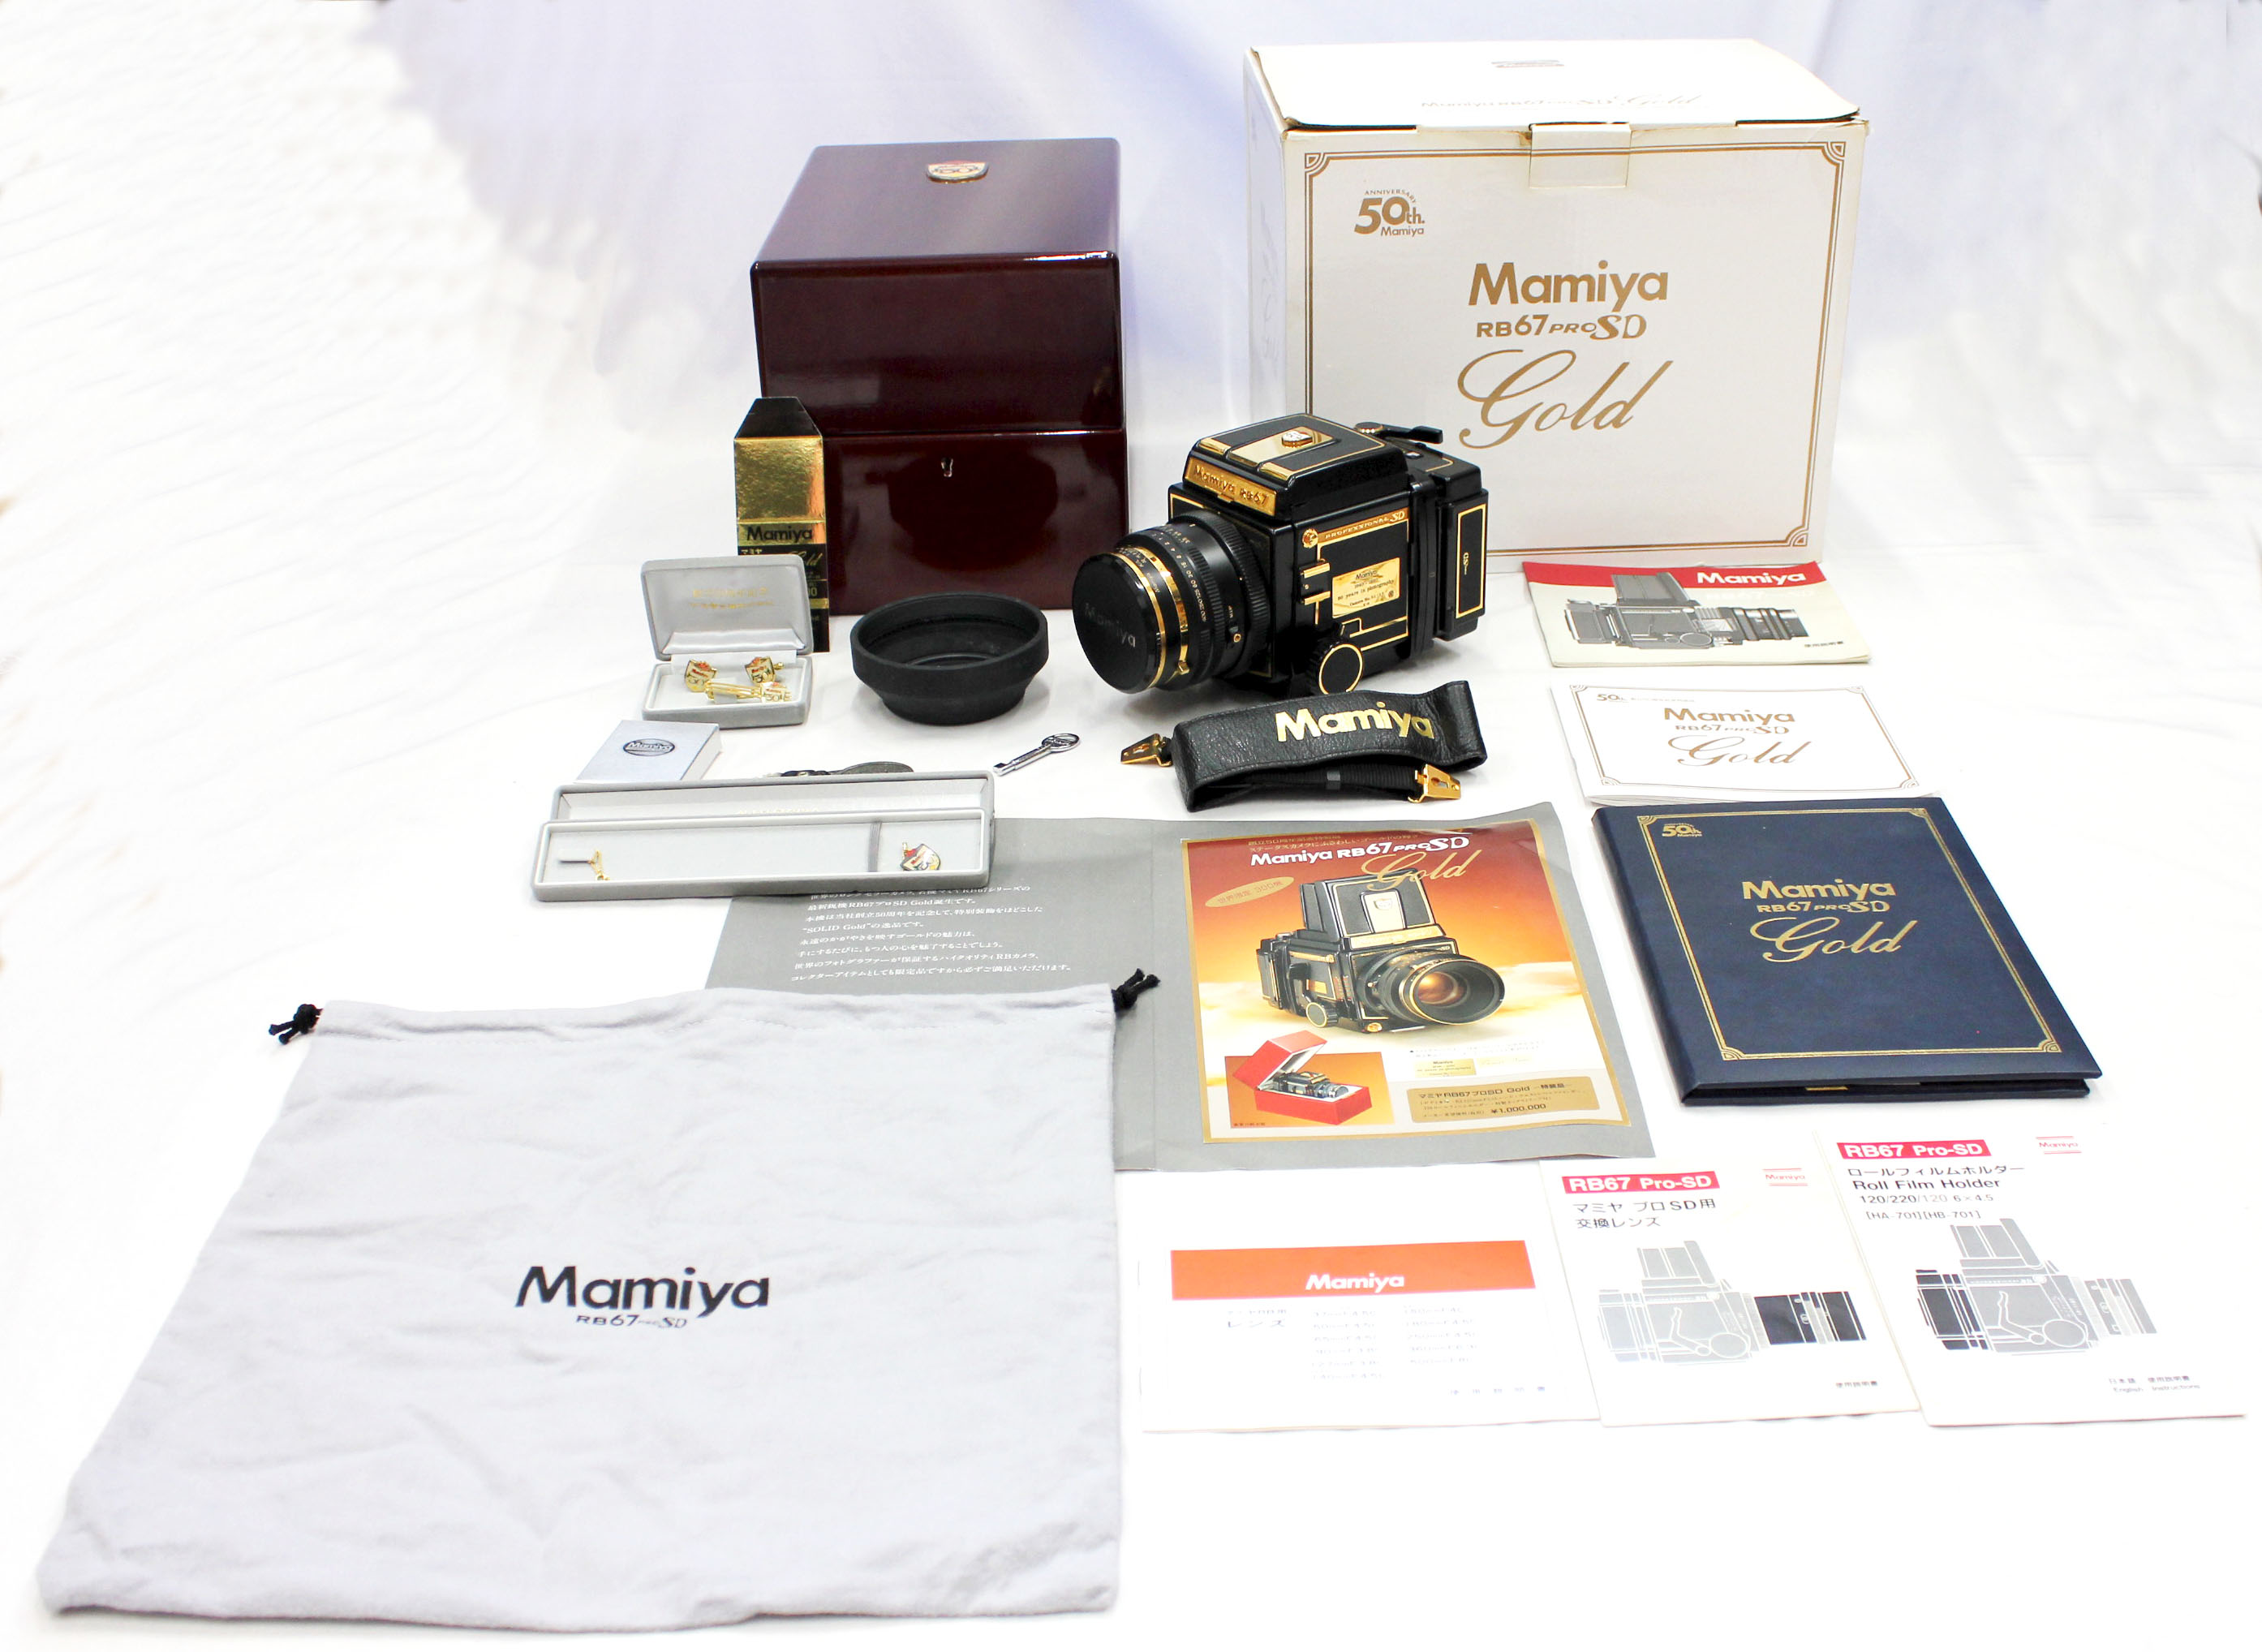 Japan Used Camera Shop | Mamiya RB67 Pro SD Gold K/L 127mm F/3.5 50 Years Limited Edition of 300 from Japan